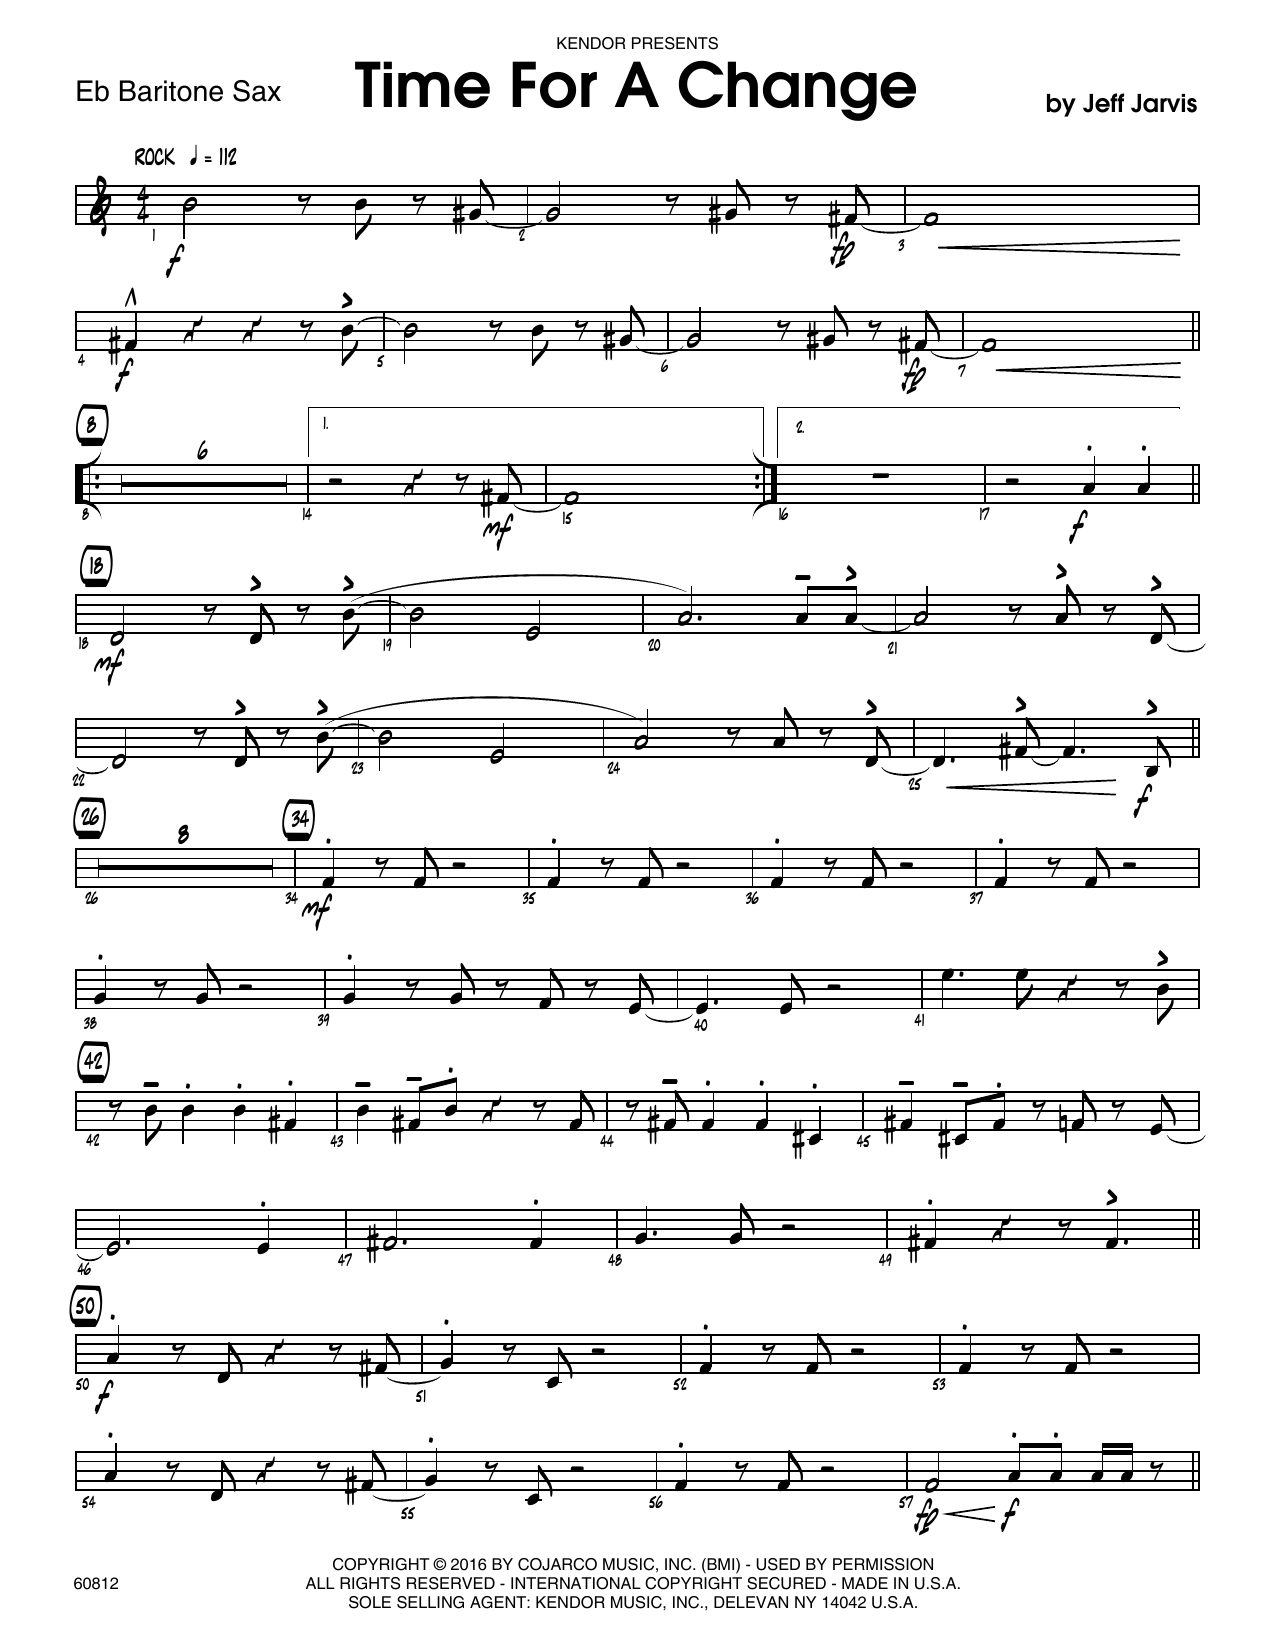 Download Jeff Jarvis Time For A Change - Eb Baritone Saxopho Sheet Music